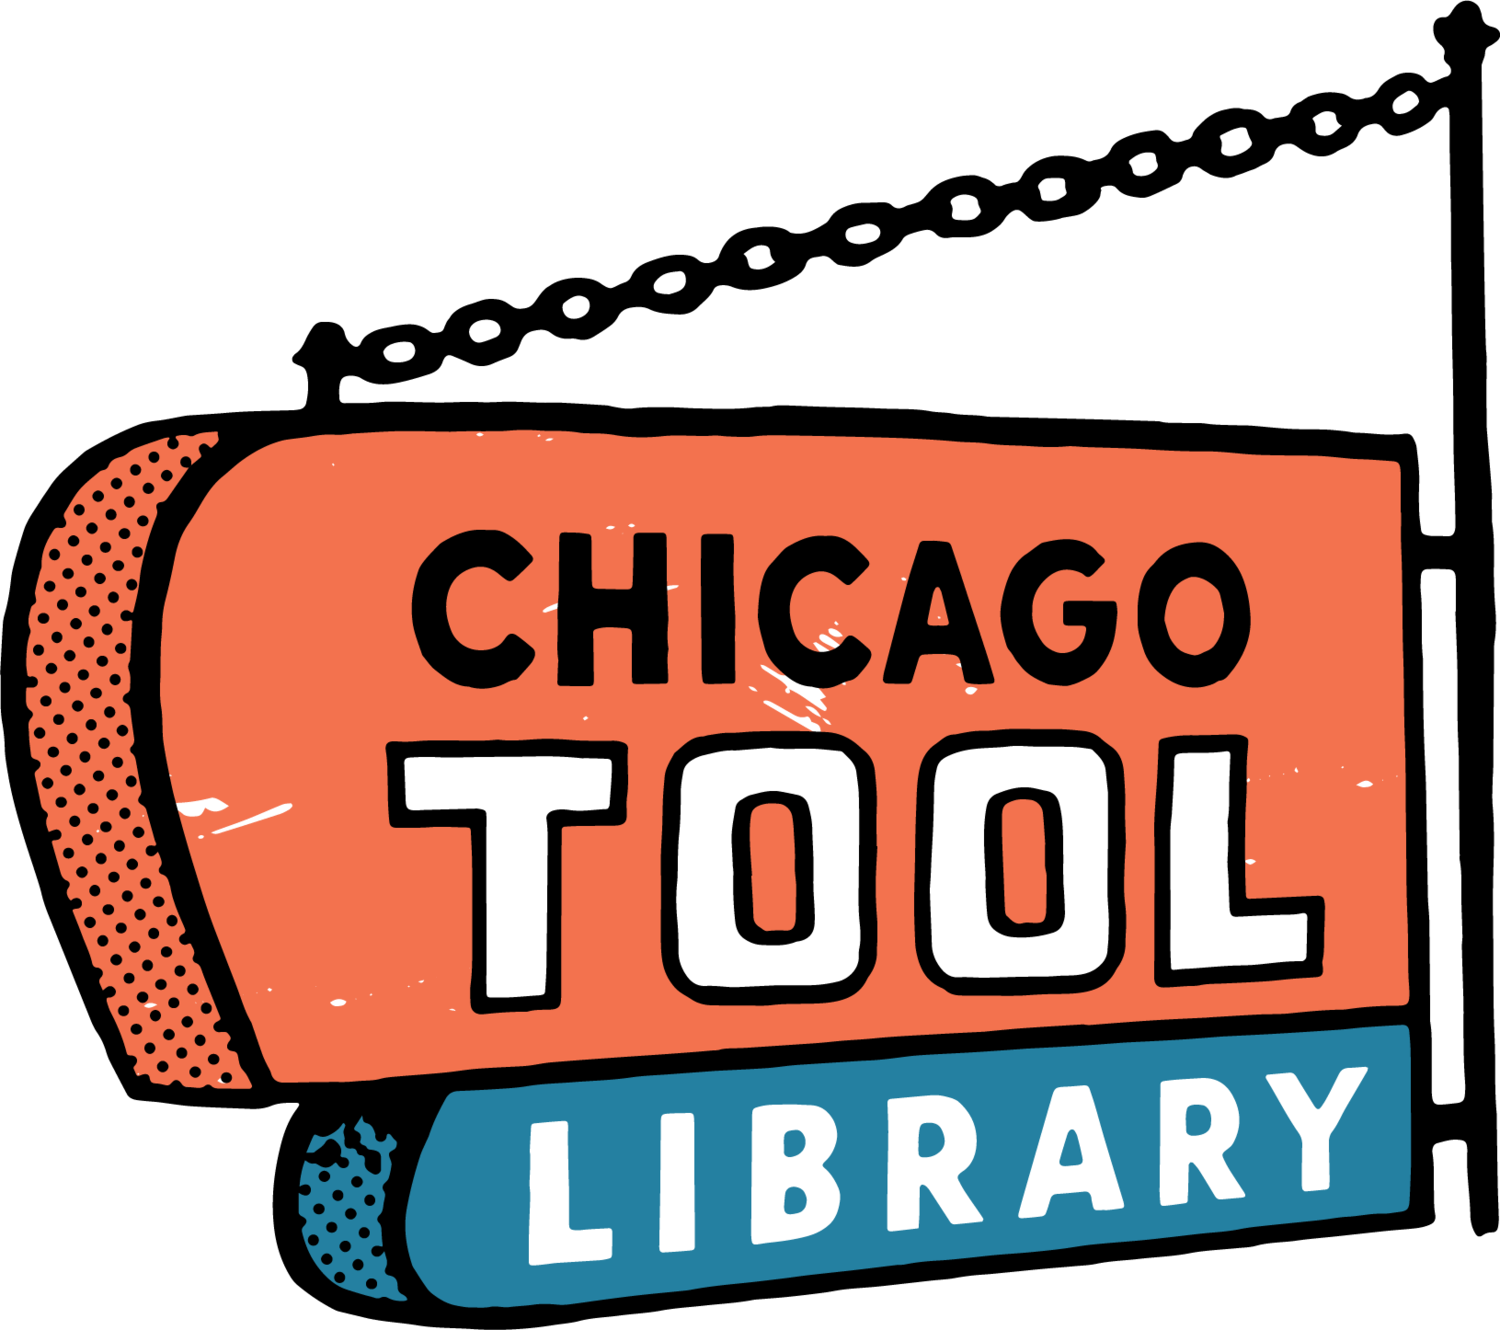 The Chicago Tool Library